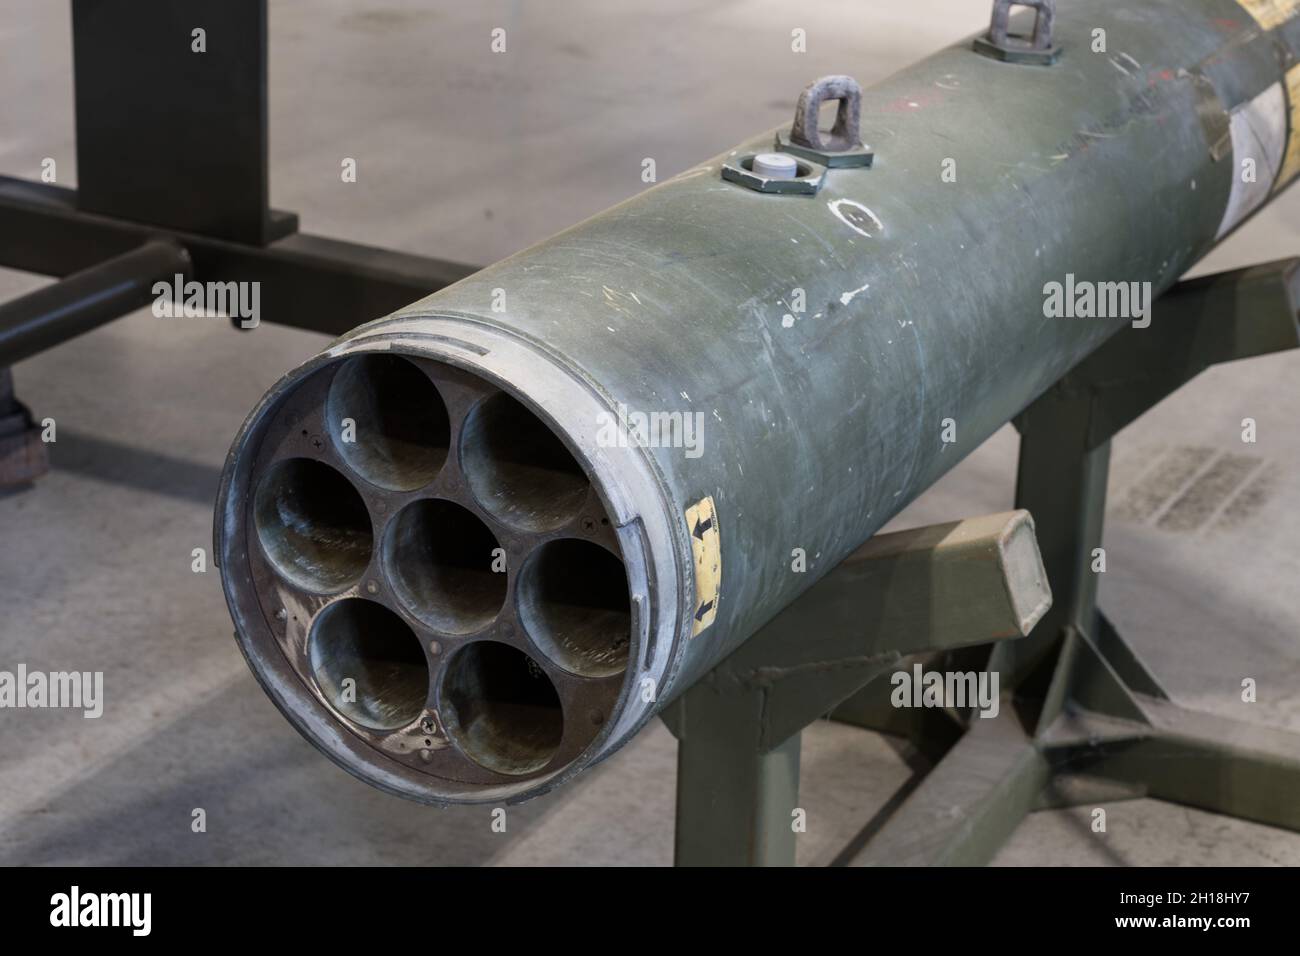 An LAU-131/A rocket launcher carried seven 2.75: unguided rockets and was used on a variety of U.S. military aircraft. Stock Photo